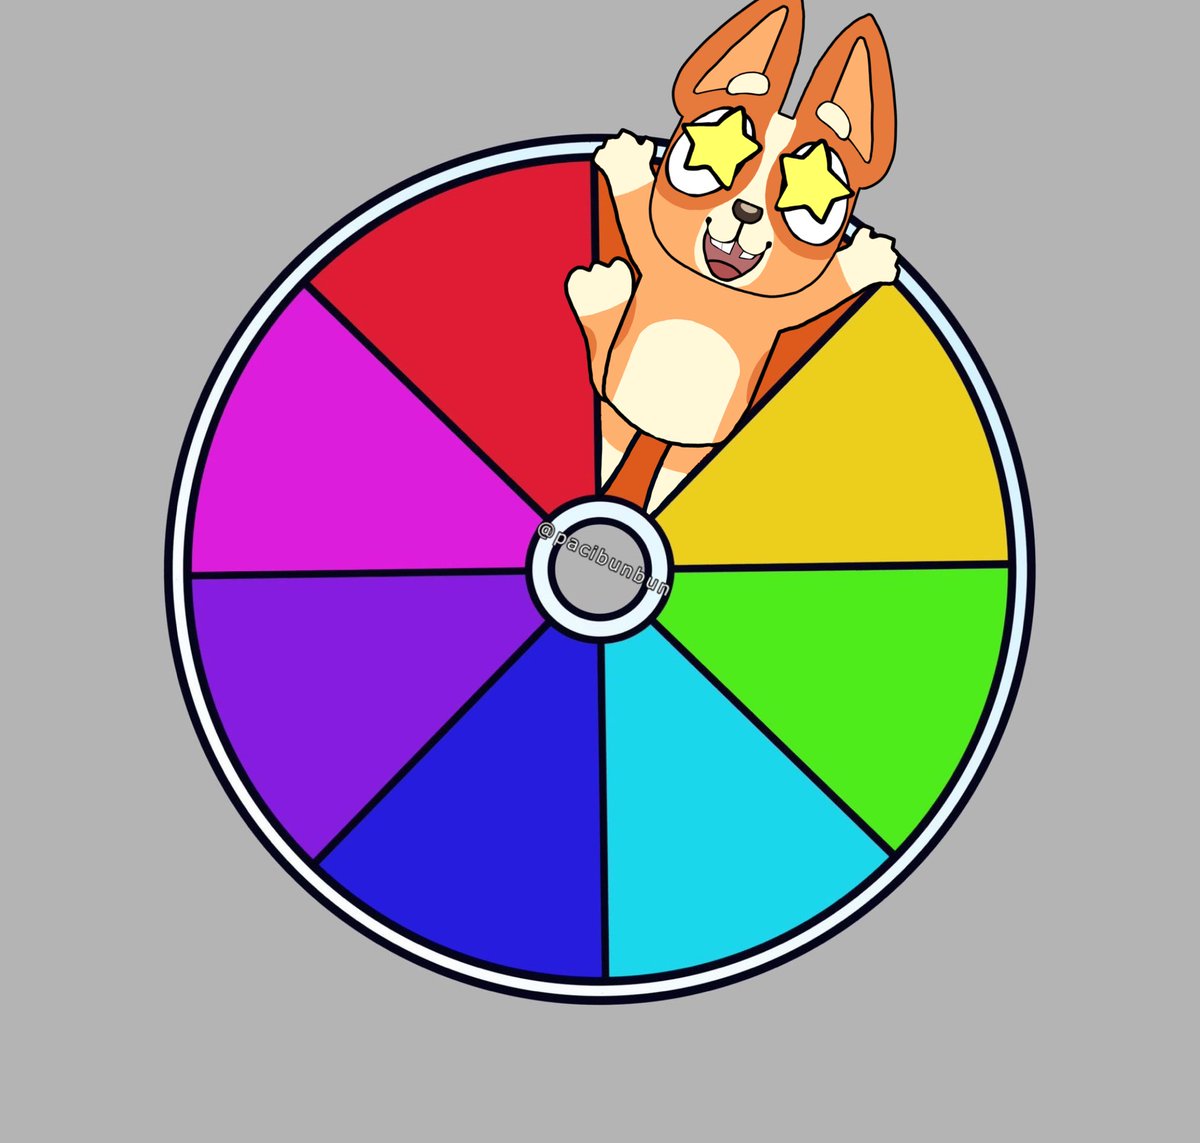 BINGO! Im done with orange! 
Now for yellow 🤔🤔 what character should I use!?
(From SFW media only)
#agere #ageregression #art #artchallenge #drawingchallenge #colorwheelchallenge #bluey #bingobluey #furry #furrysfw #furryart #sfwart #sfw